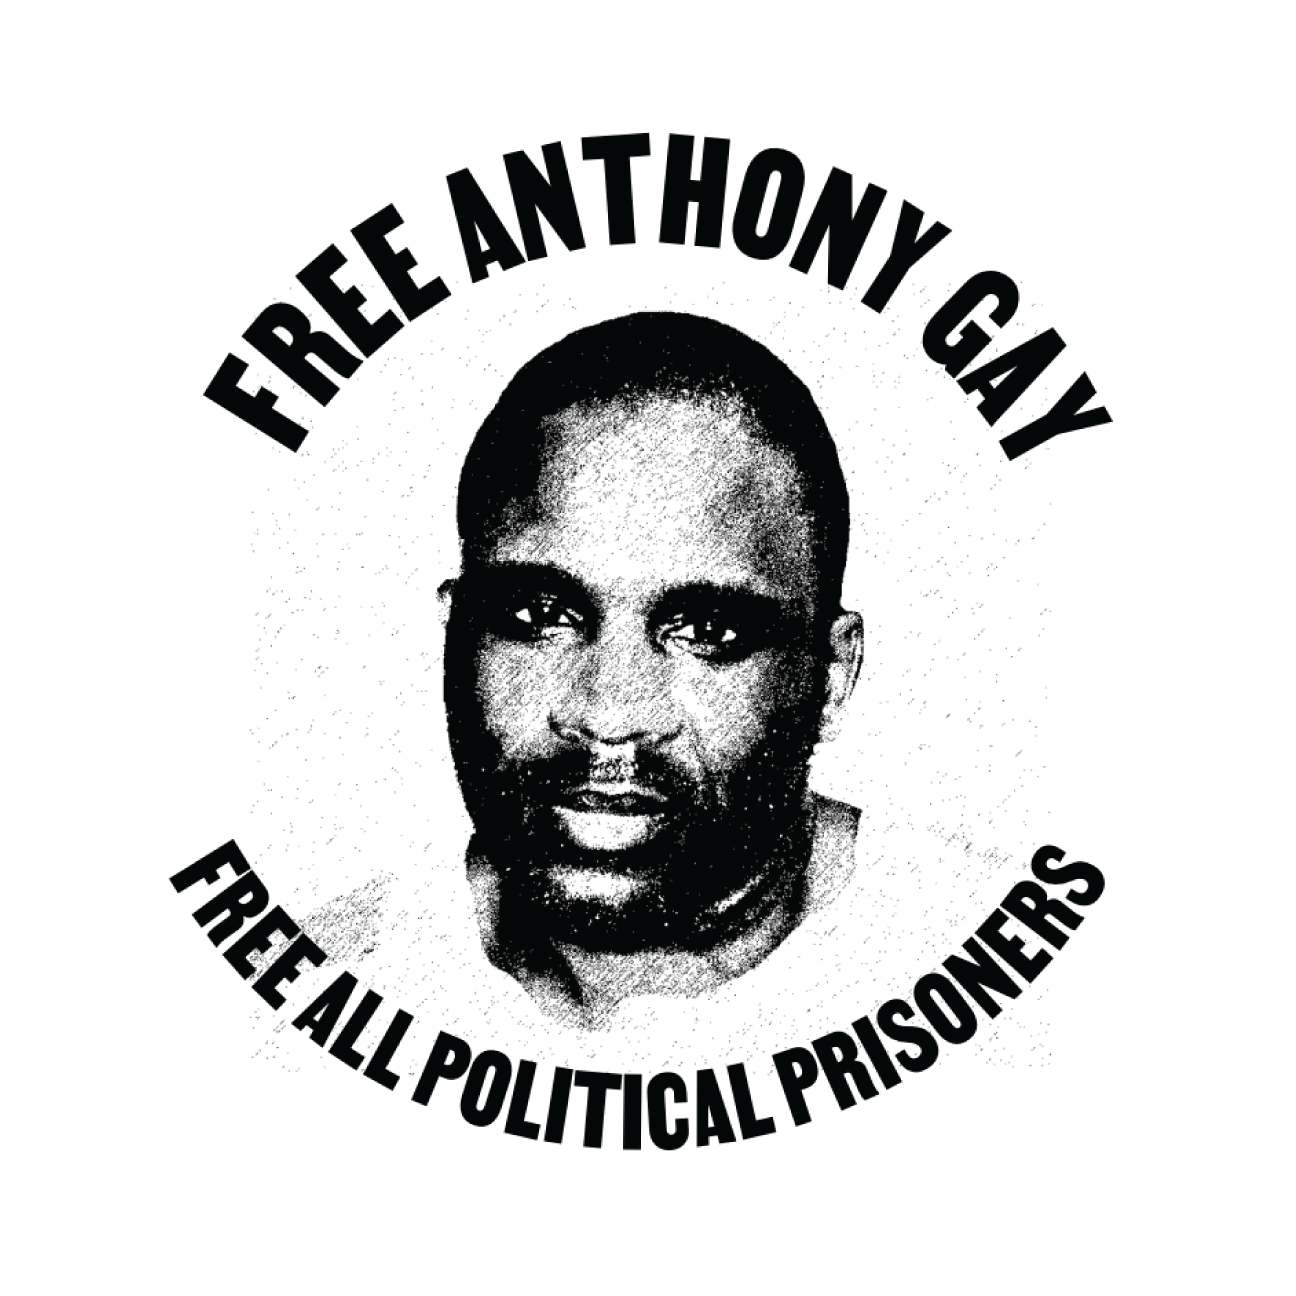 Demand Anthony Gay’s Communication Access Be Immediately Restored!